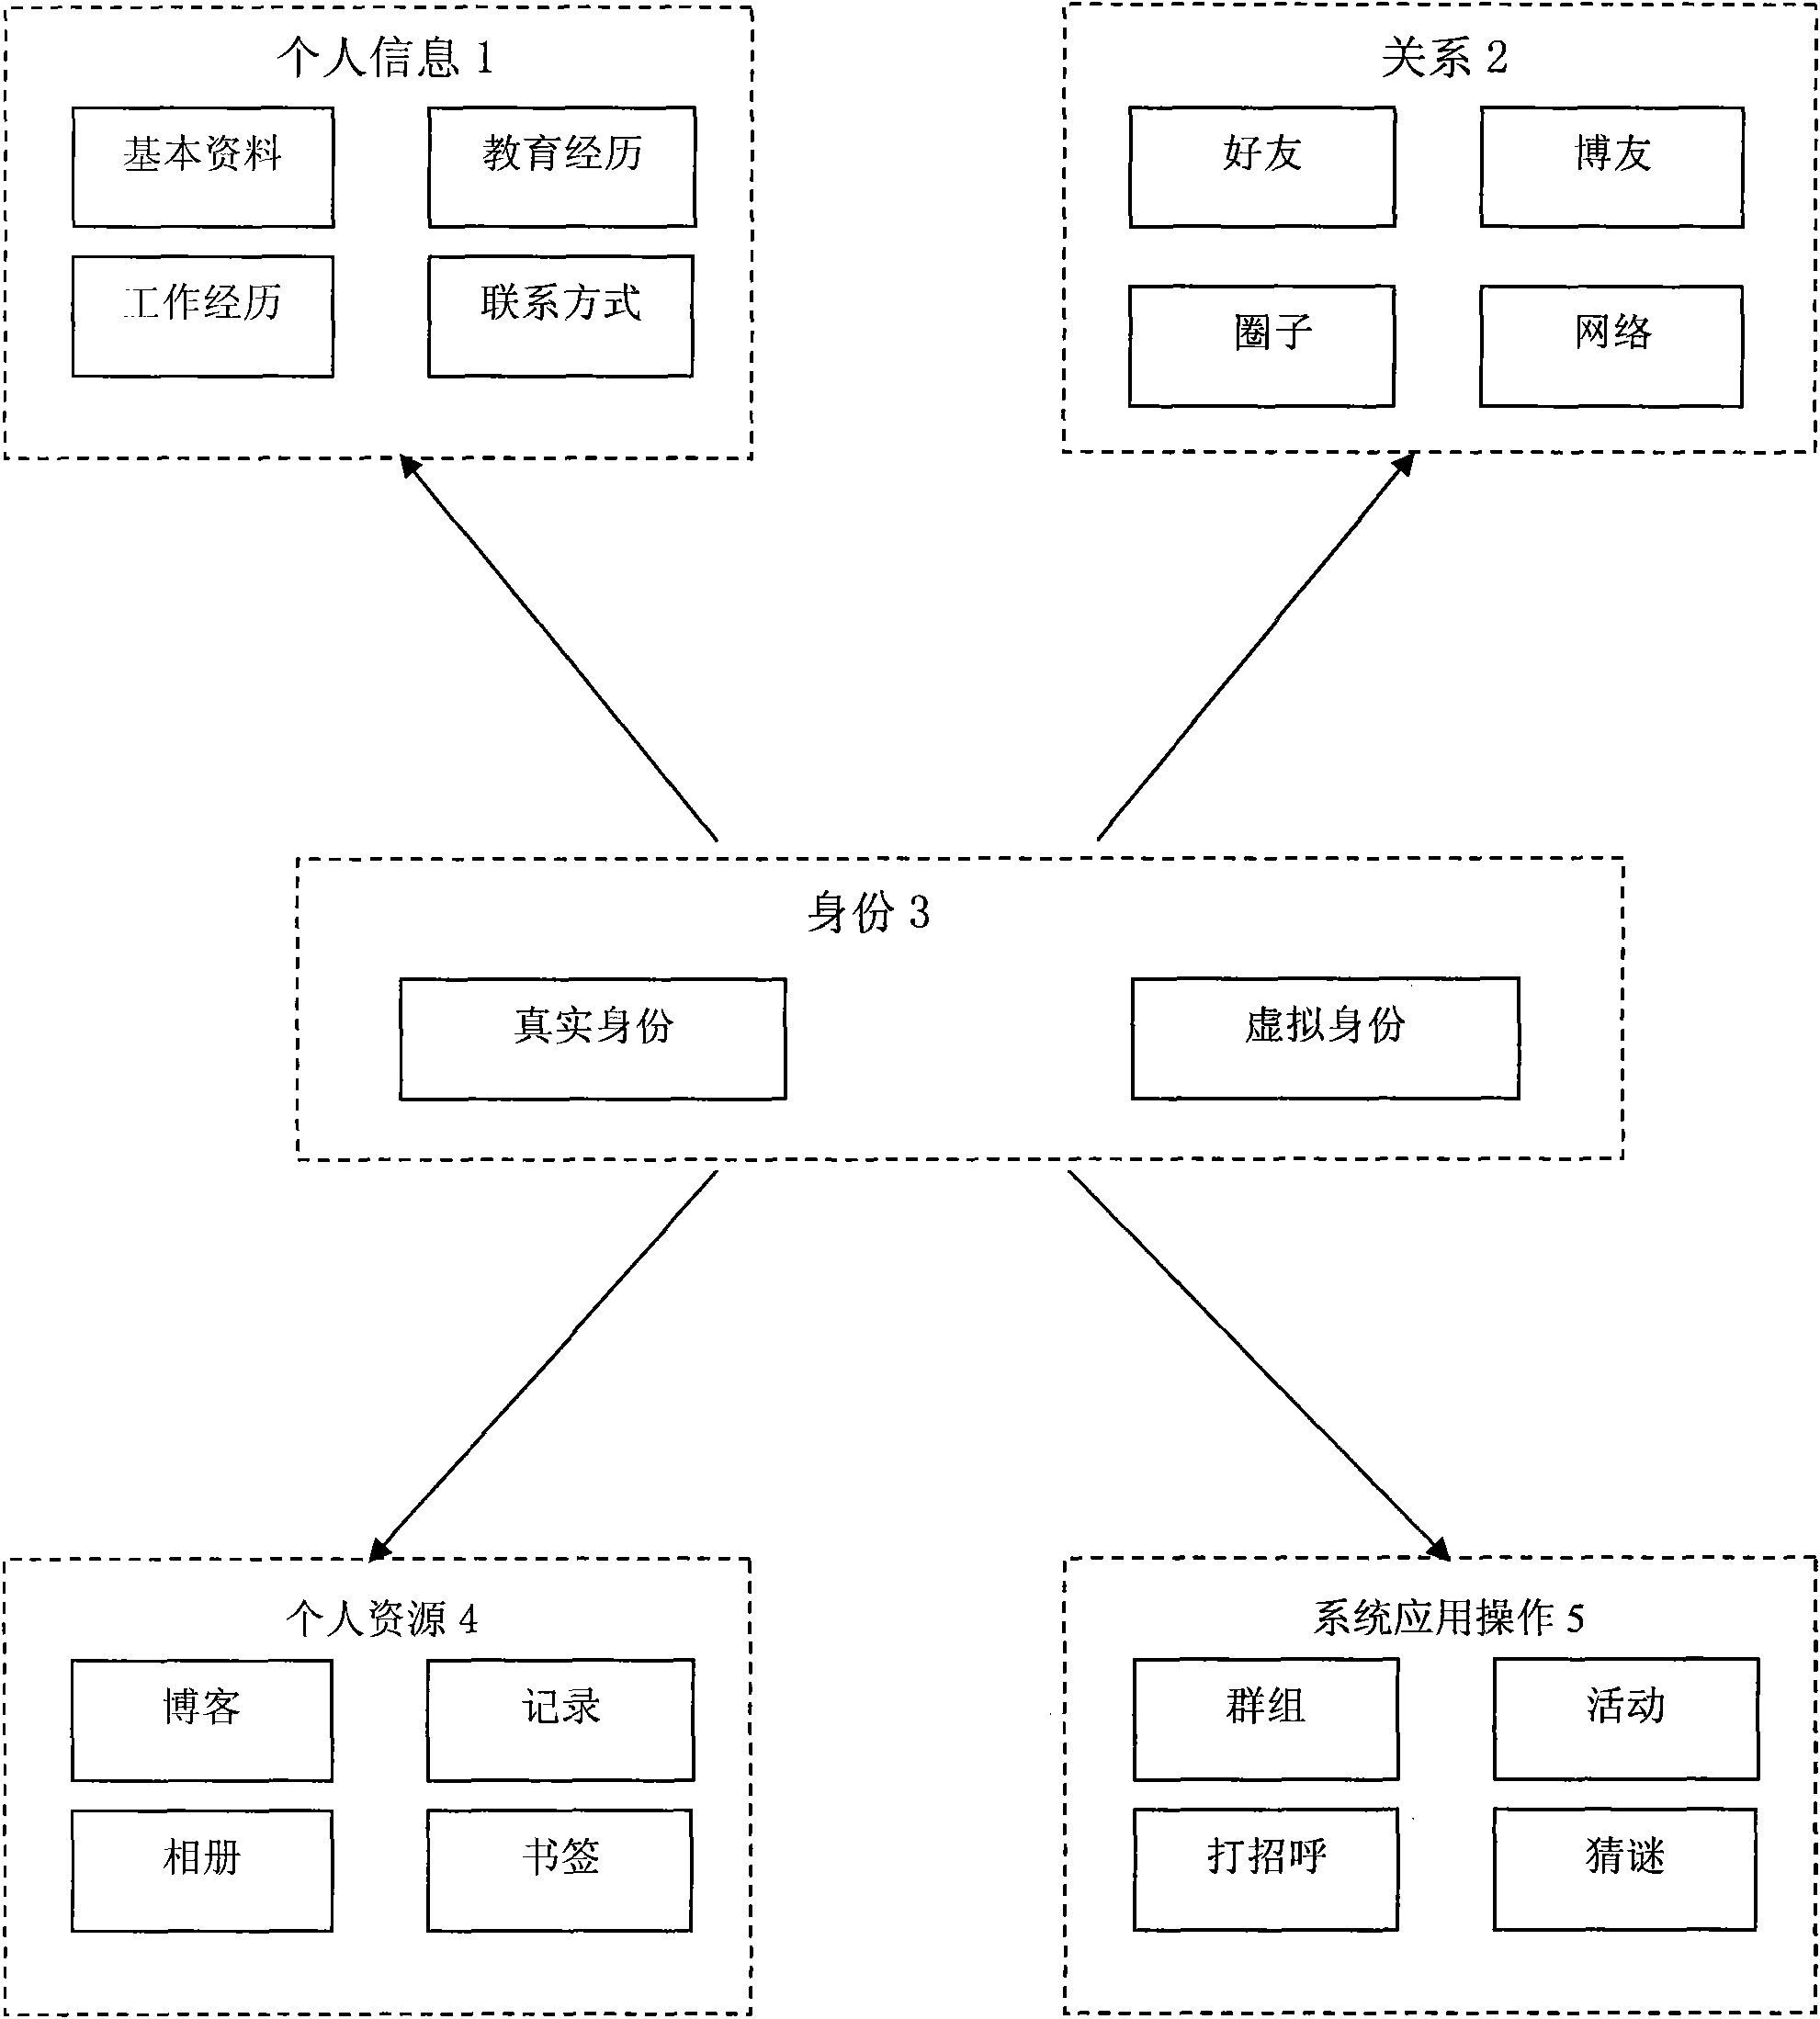 Multi-identity network social intercourse system and implementation method